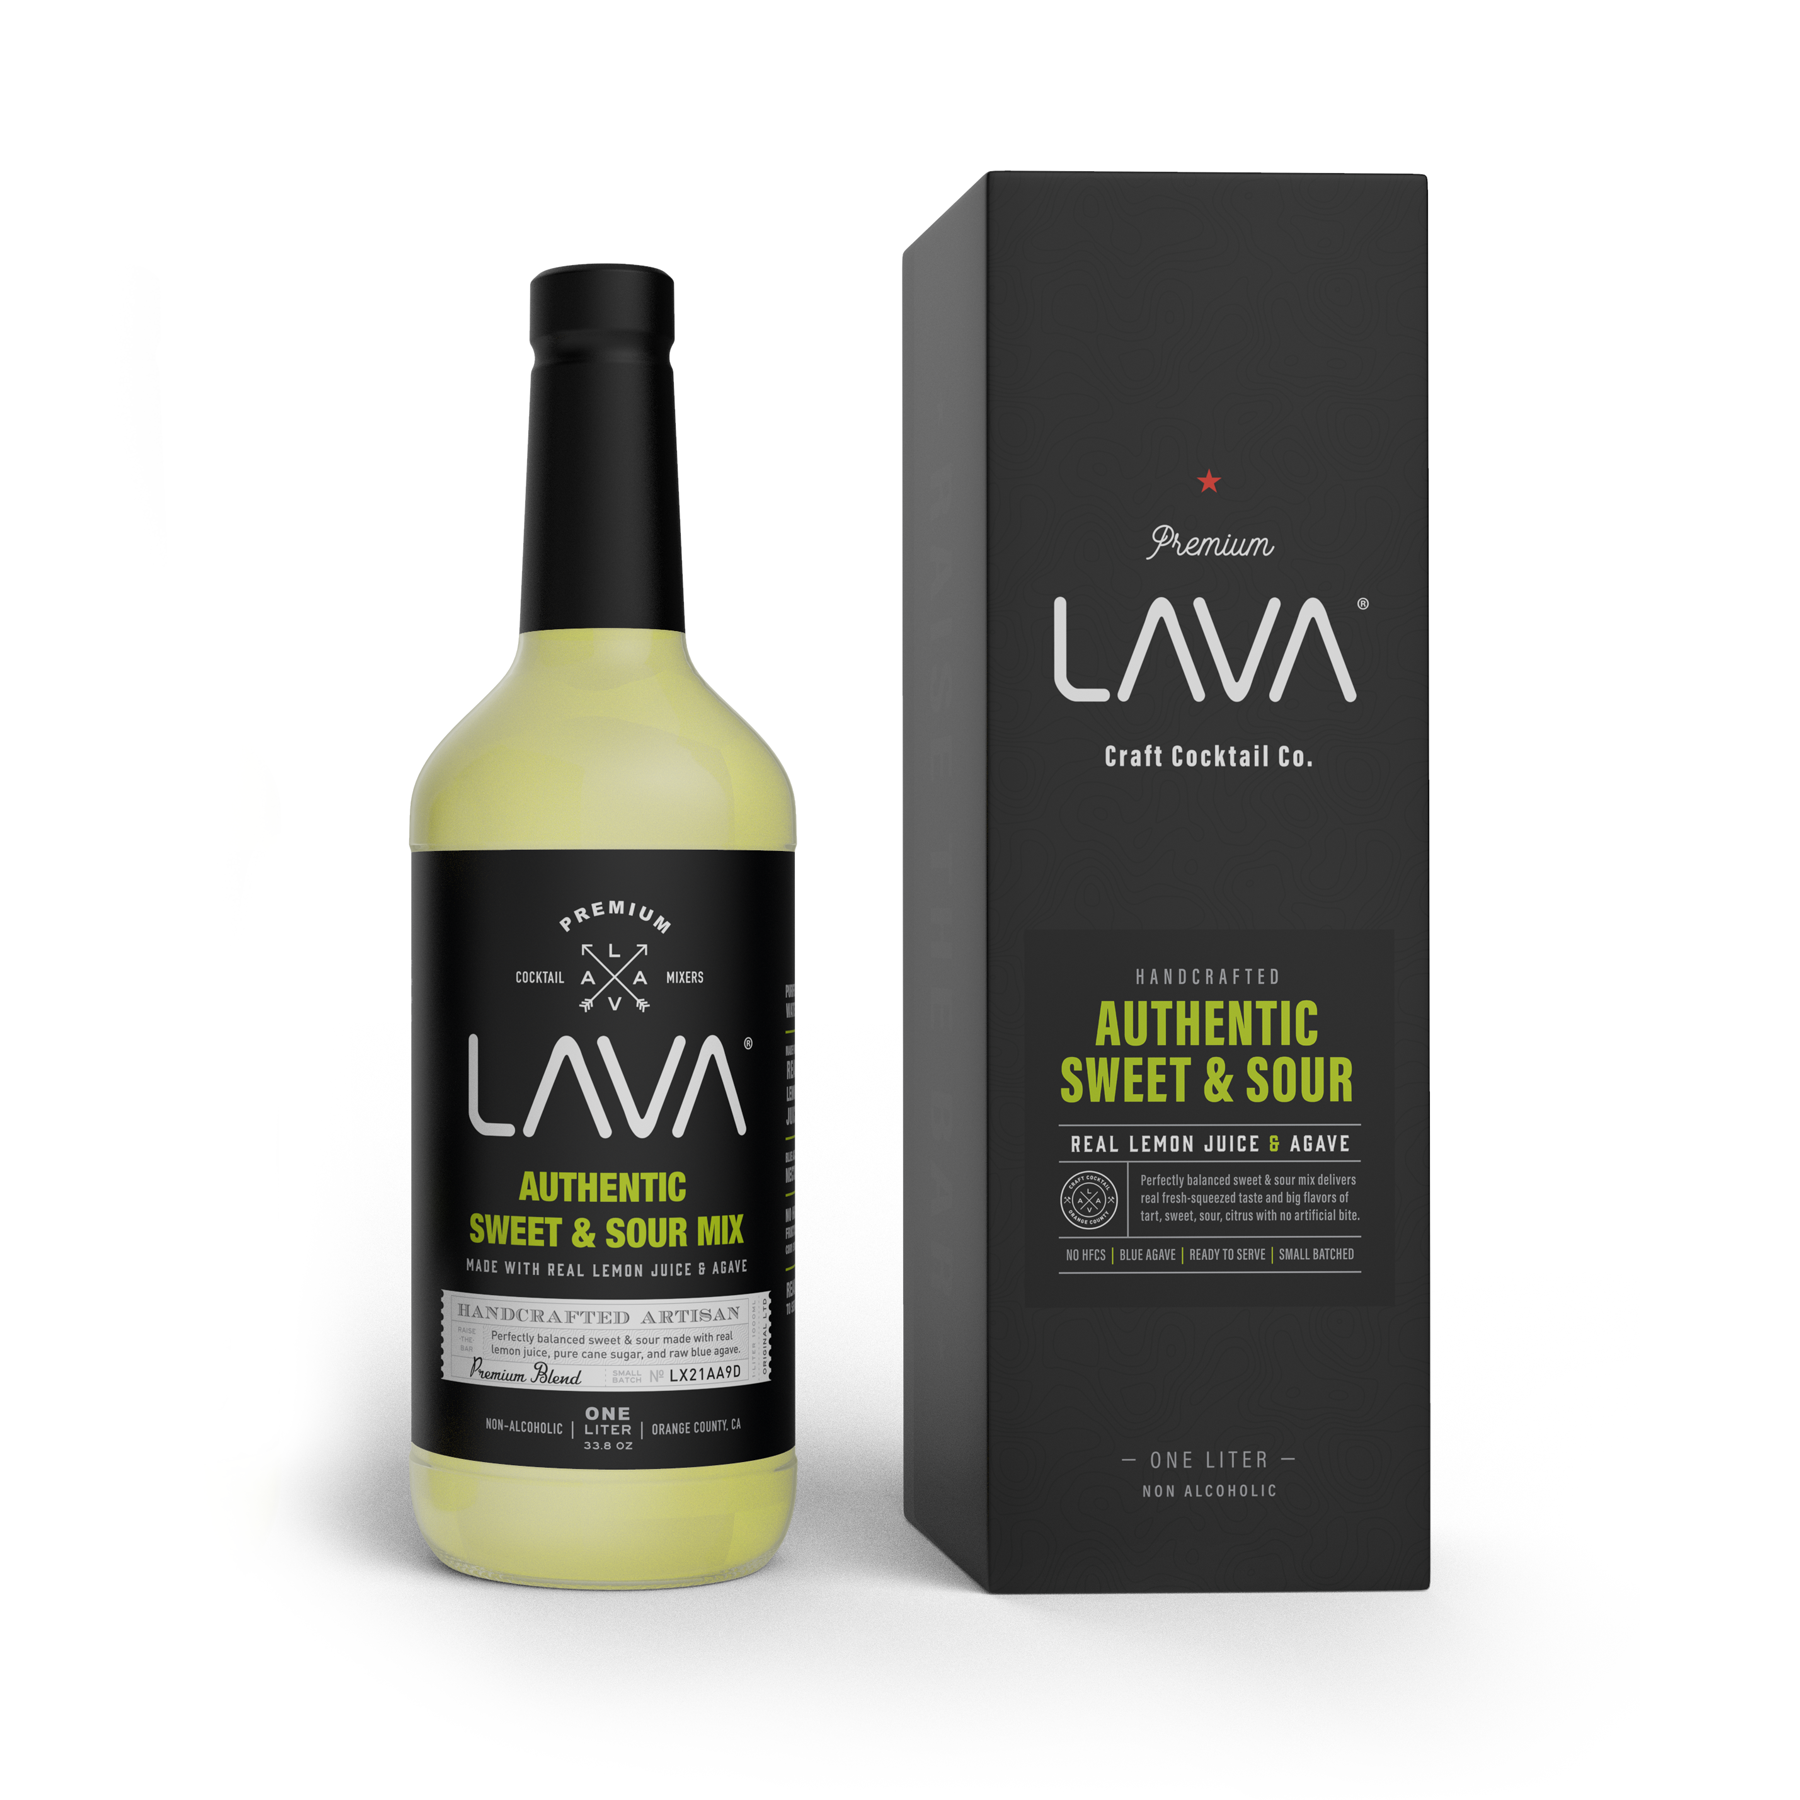 Lava Premium Authentic Sweet & Sour Mix, Made with Real Lemon Juice, Lime Juice, Raw Blue Agave, No Artificial Sweeteners. Whiskey Sour, Long Island